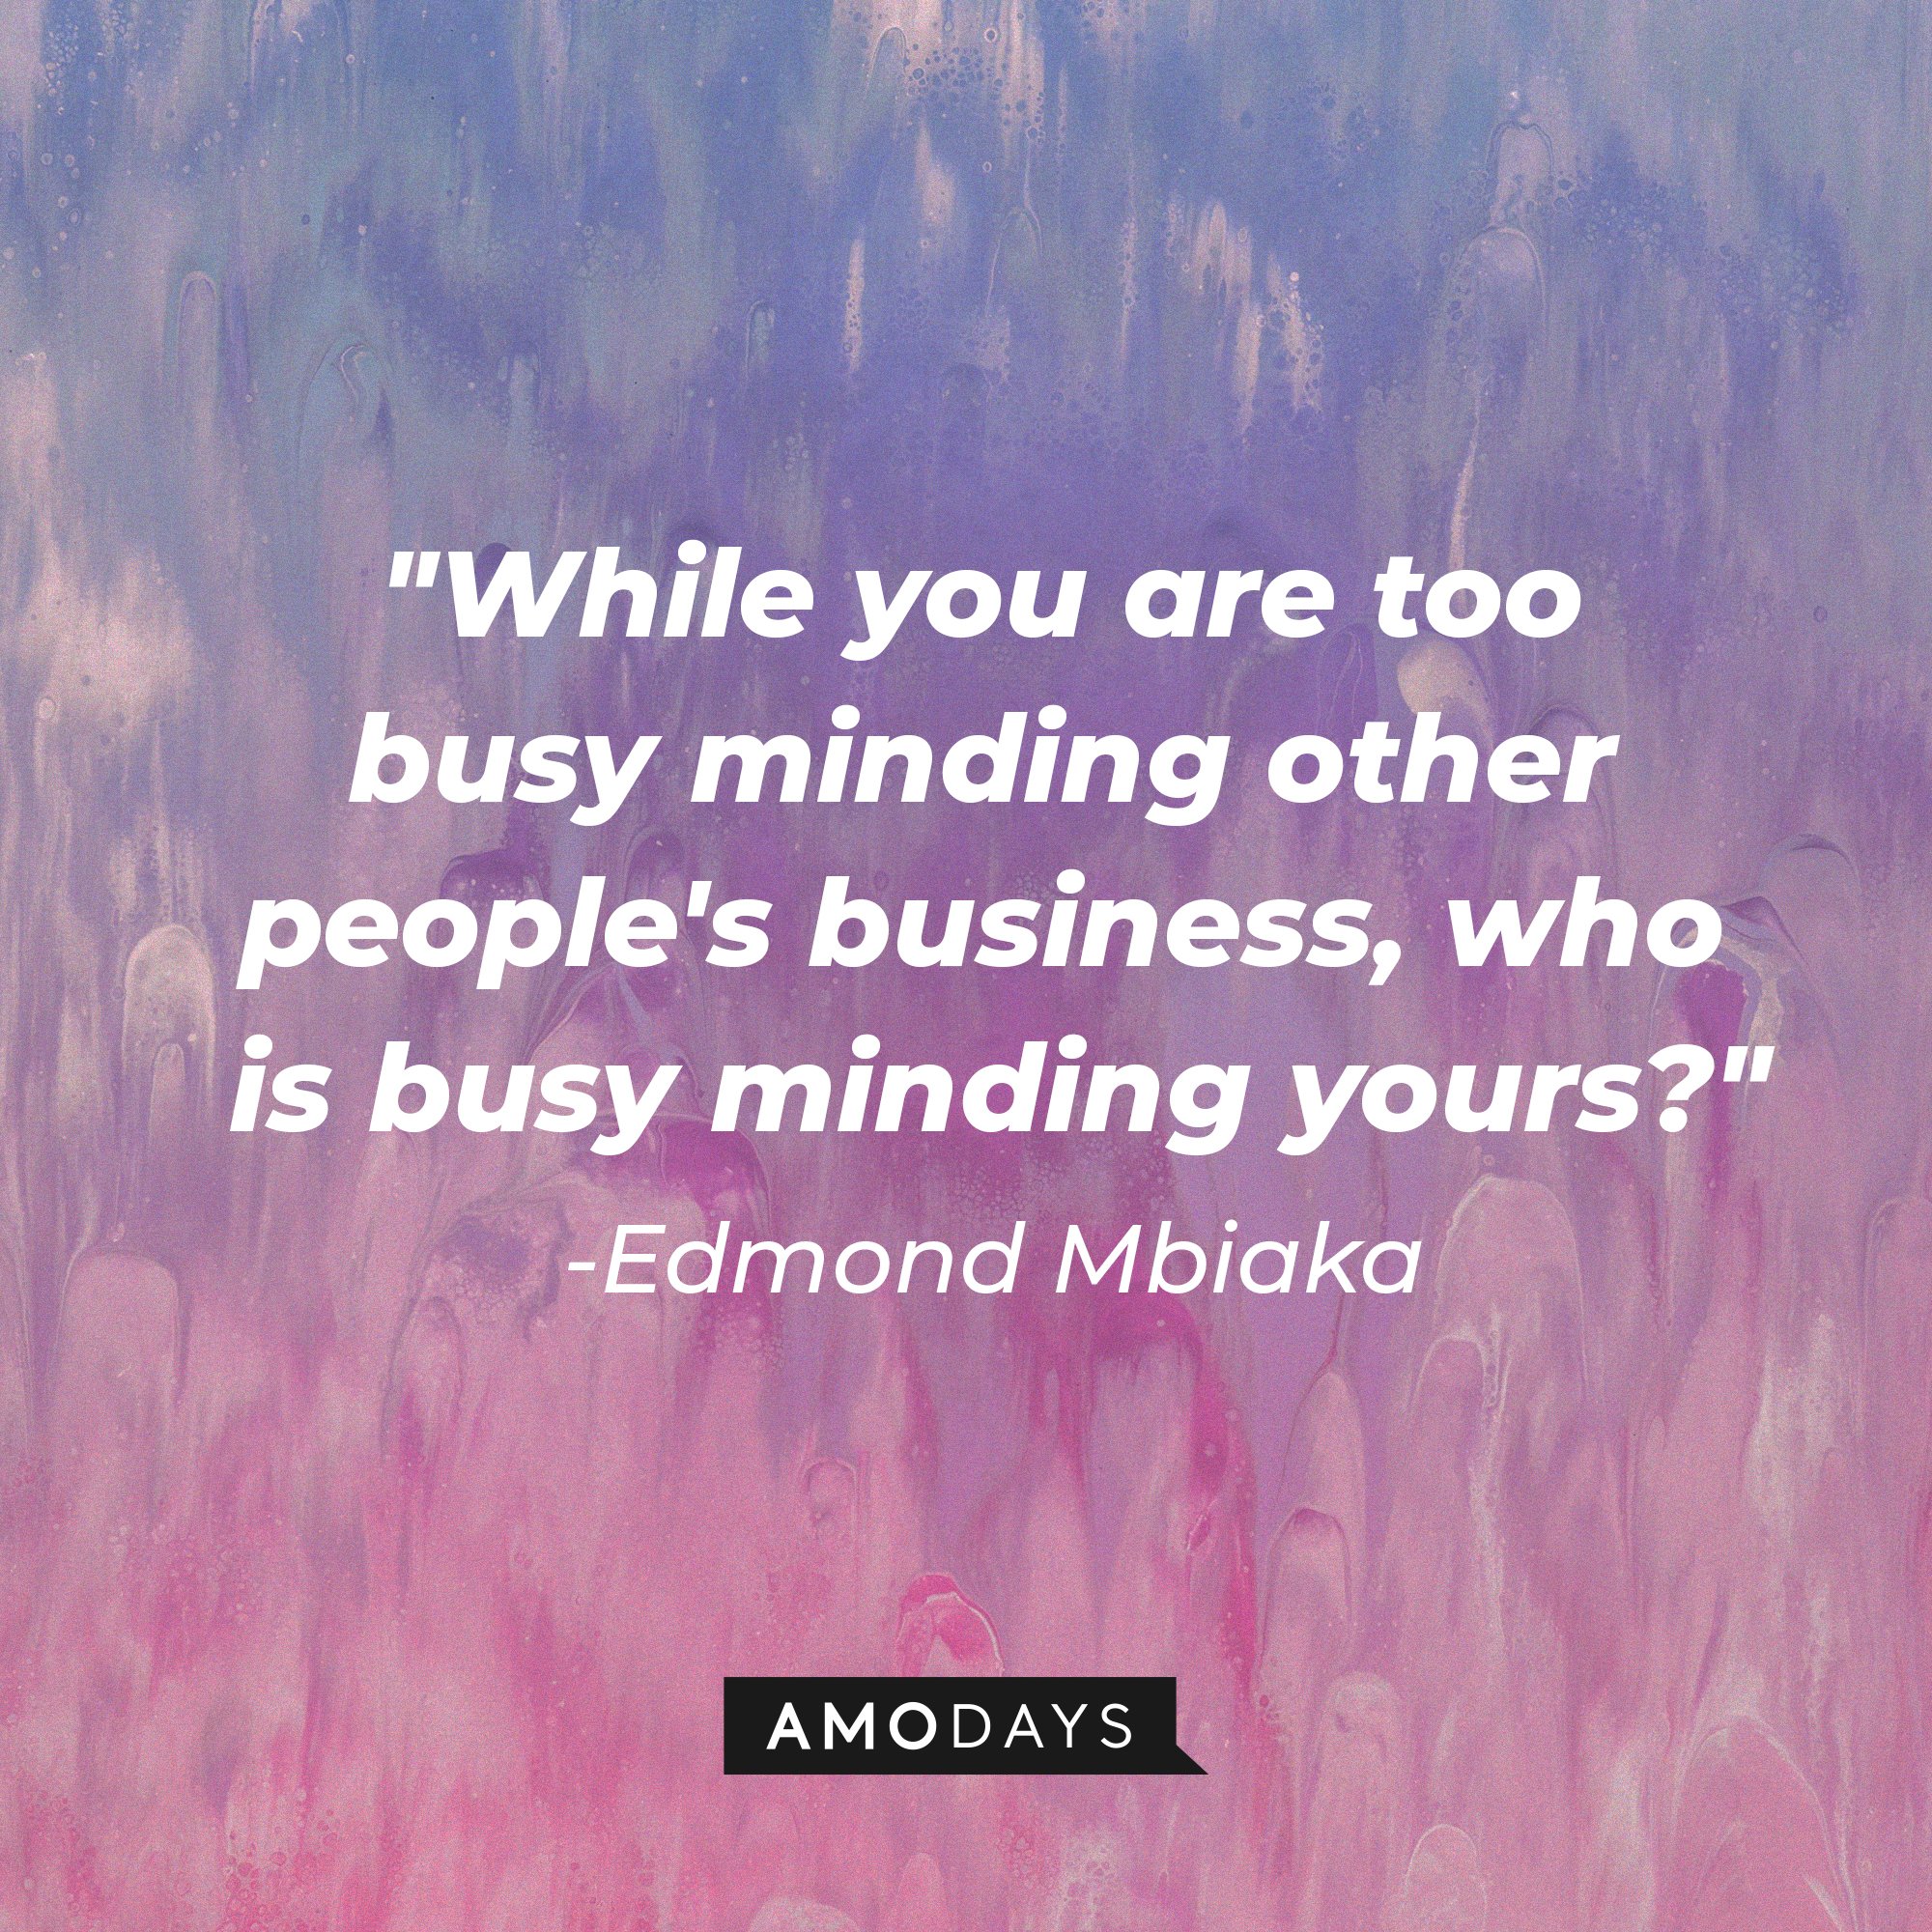 Edmond Mbiaka’s quote: "While you are too busy minding other people's business, who is busy minding yours?" | Image: AmoDays